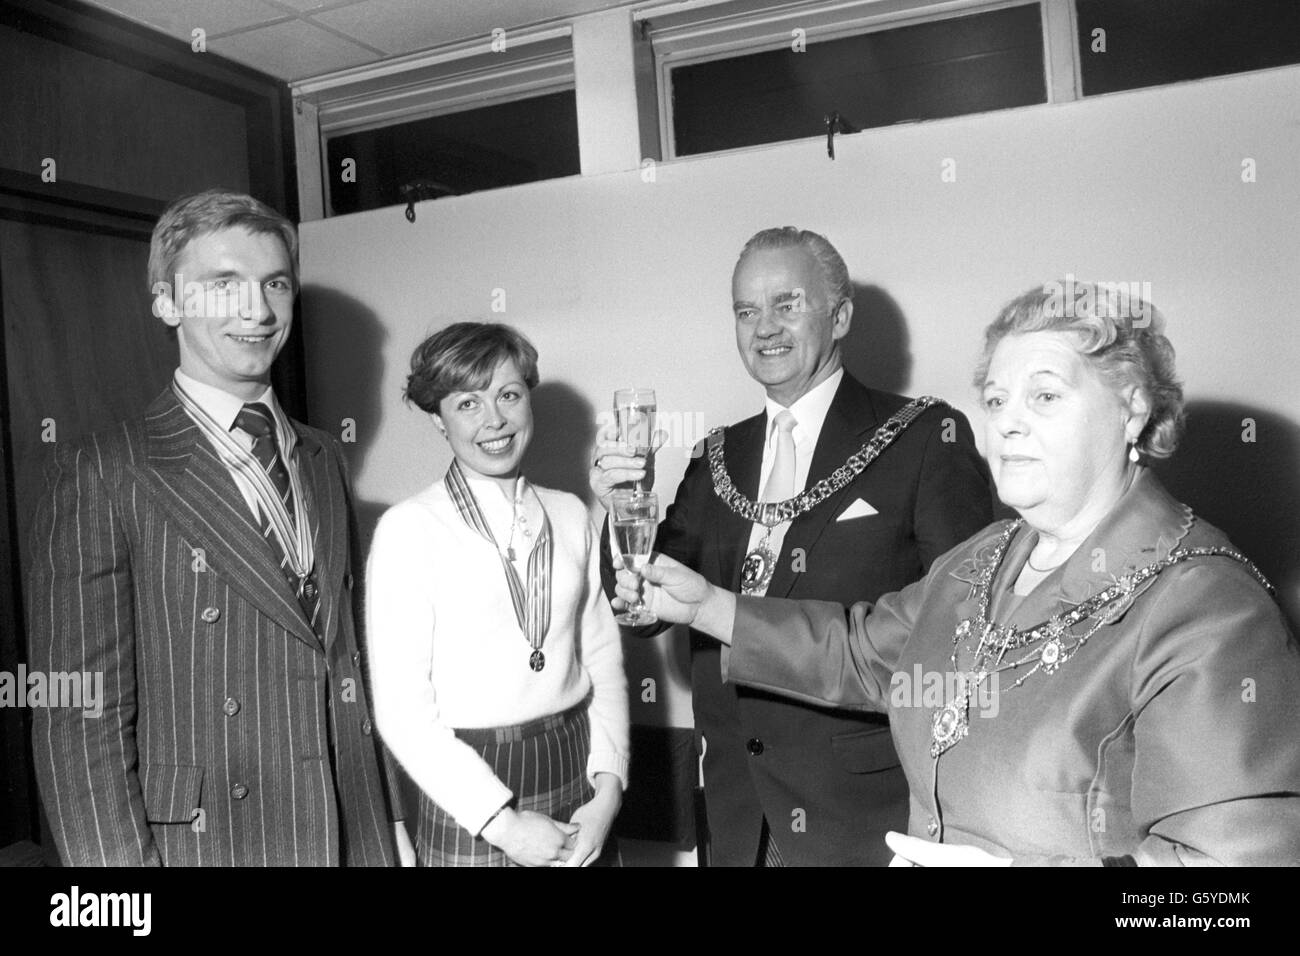 The Lord and Lady Mayoress of Nottingham, Councillor Tom and Mrs Nancy Wilkins giving a champagne welcome to Christopher Dean and Jayne Torvill at the East Midlands airport at Castle Donnington after they returned home from their gold medal success in the European Ice Dancing championships at Innsbruck. Stock Photo